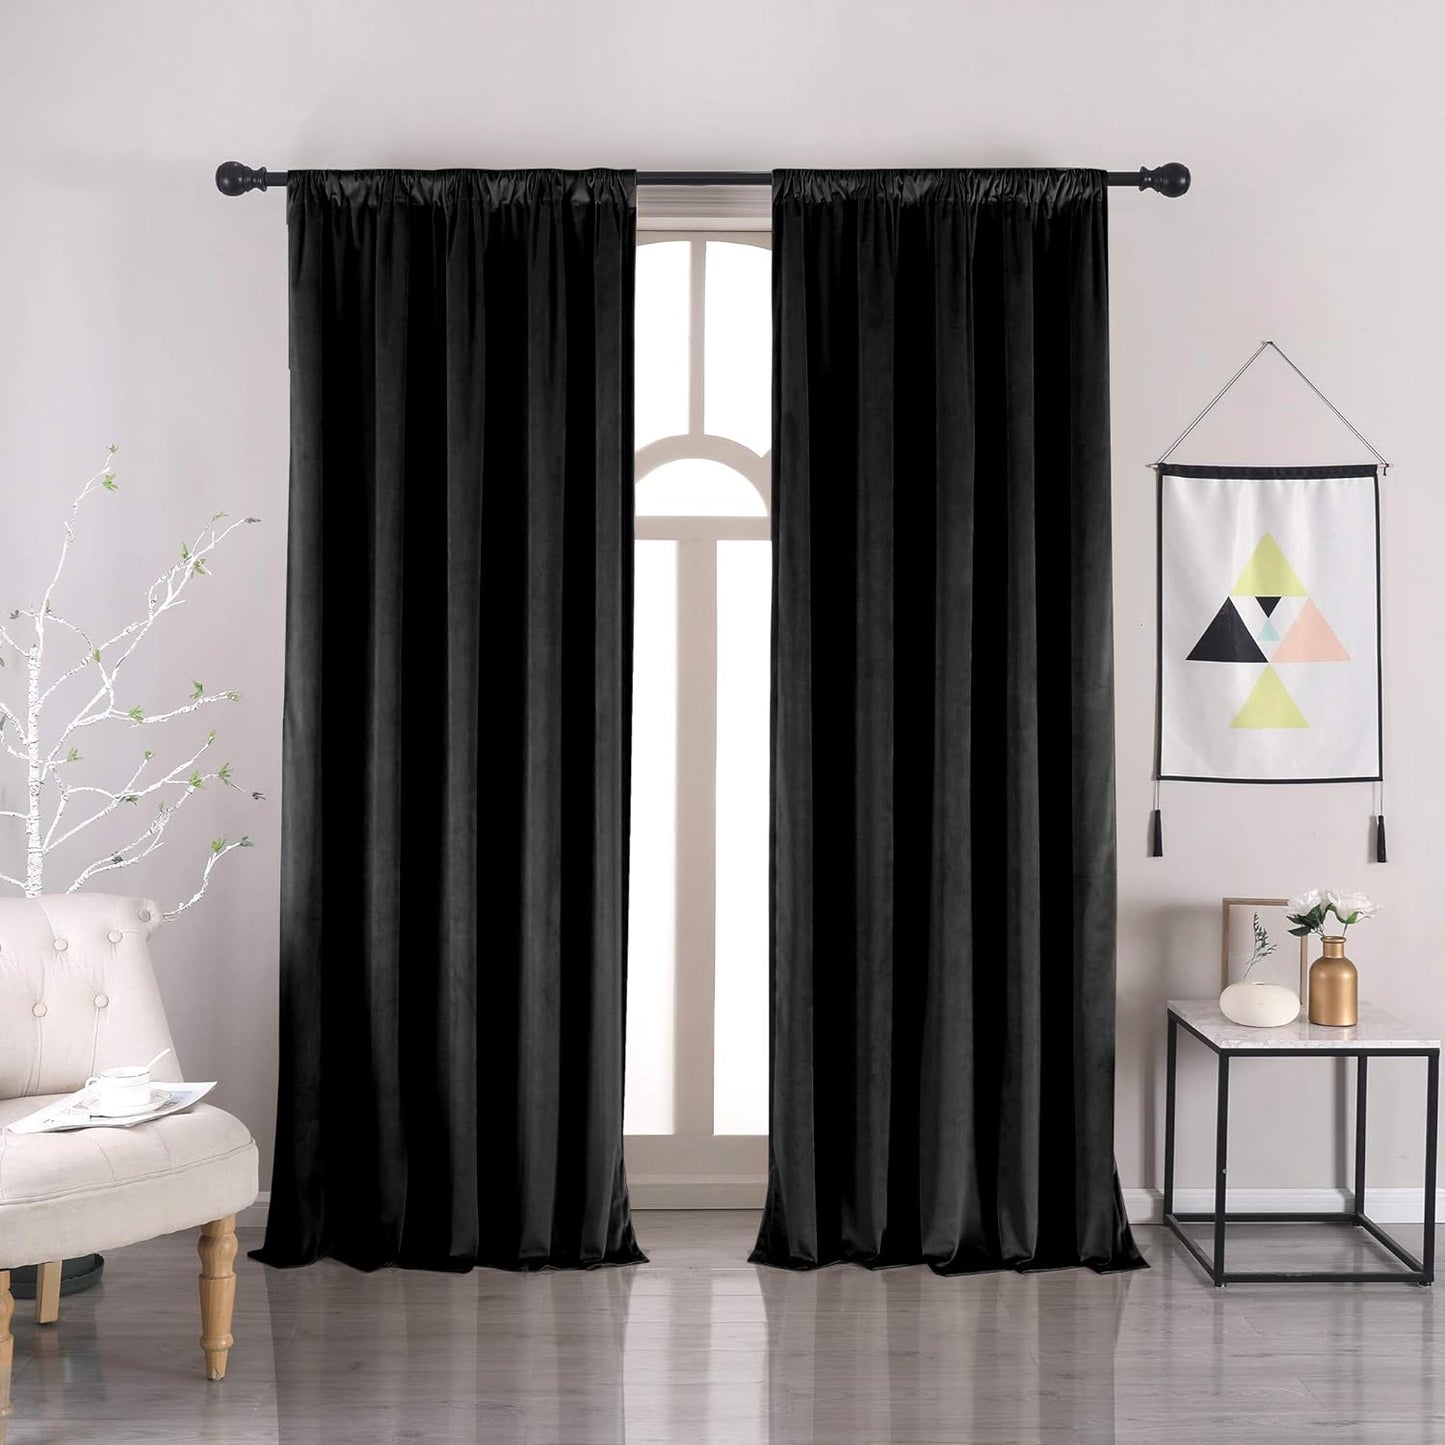 Nanbowang Green Velvet Curtains 63 Inches Long Dark Green Light Blocking Rod Pocket Window Curtain Panels Set of 2 Heat Insulated Curtains Thermal Curtain Panels for Bedroom  nanbowang Black 52"X72" 